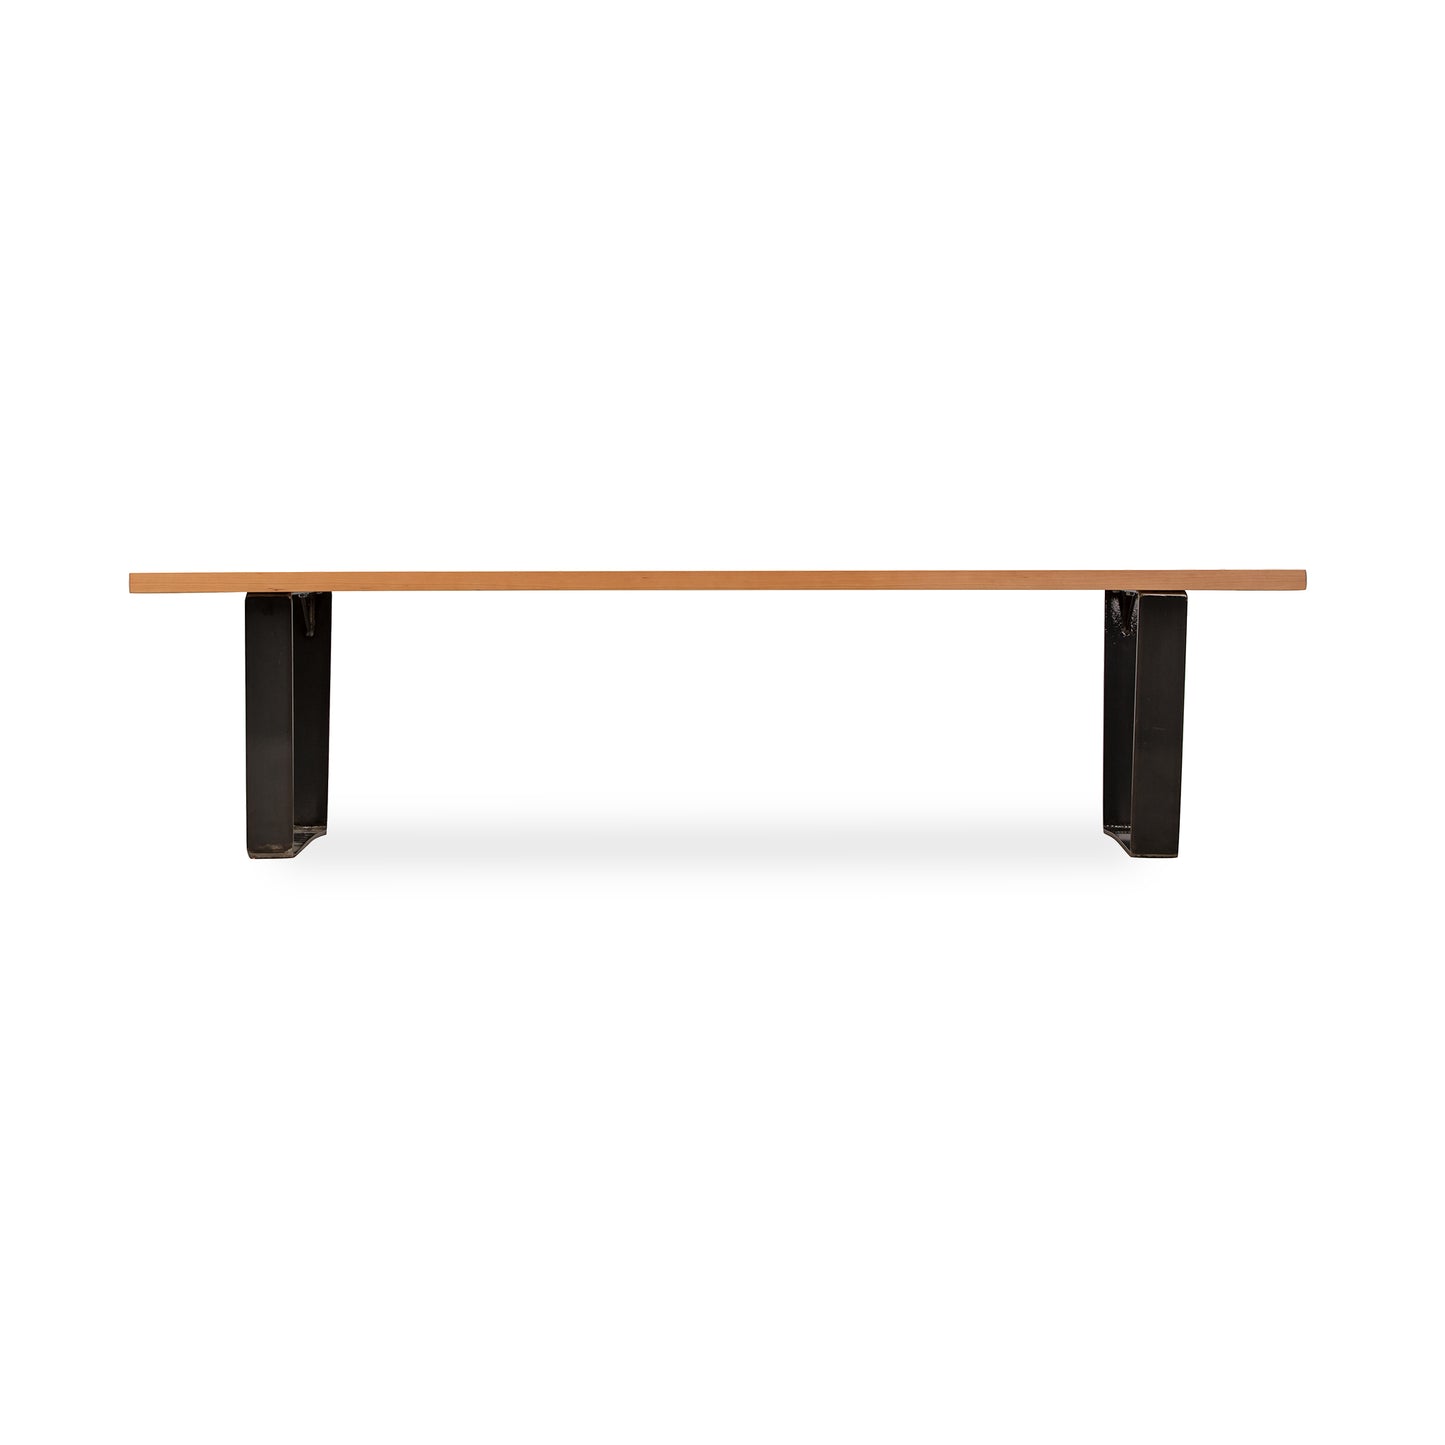 A wooden table with black legs on a white background.